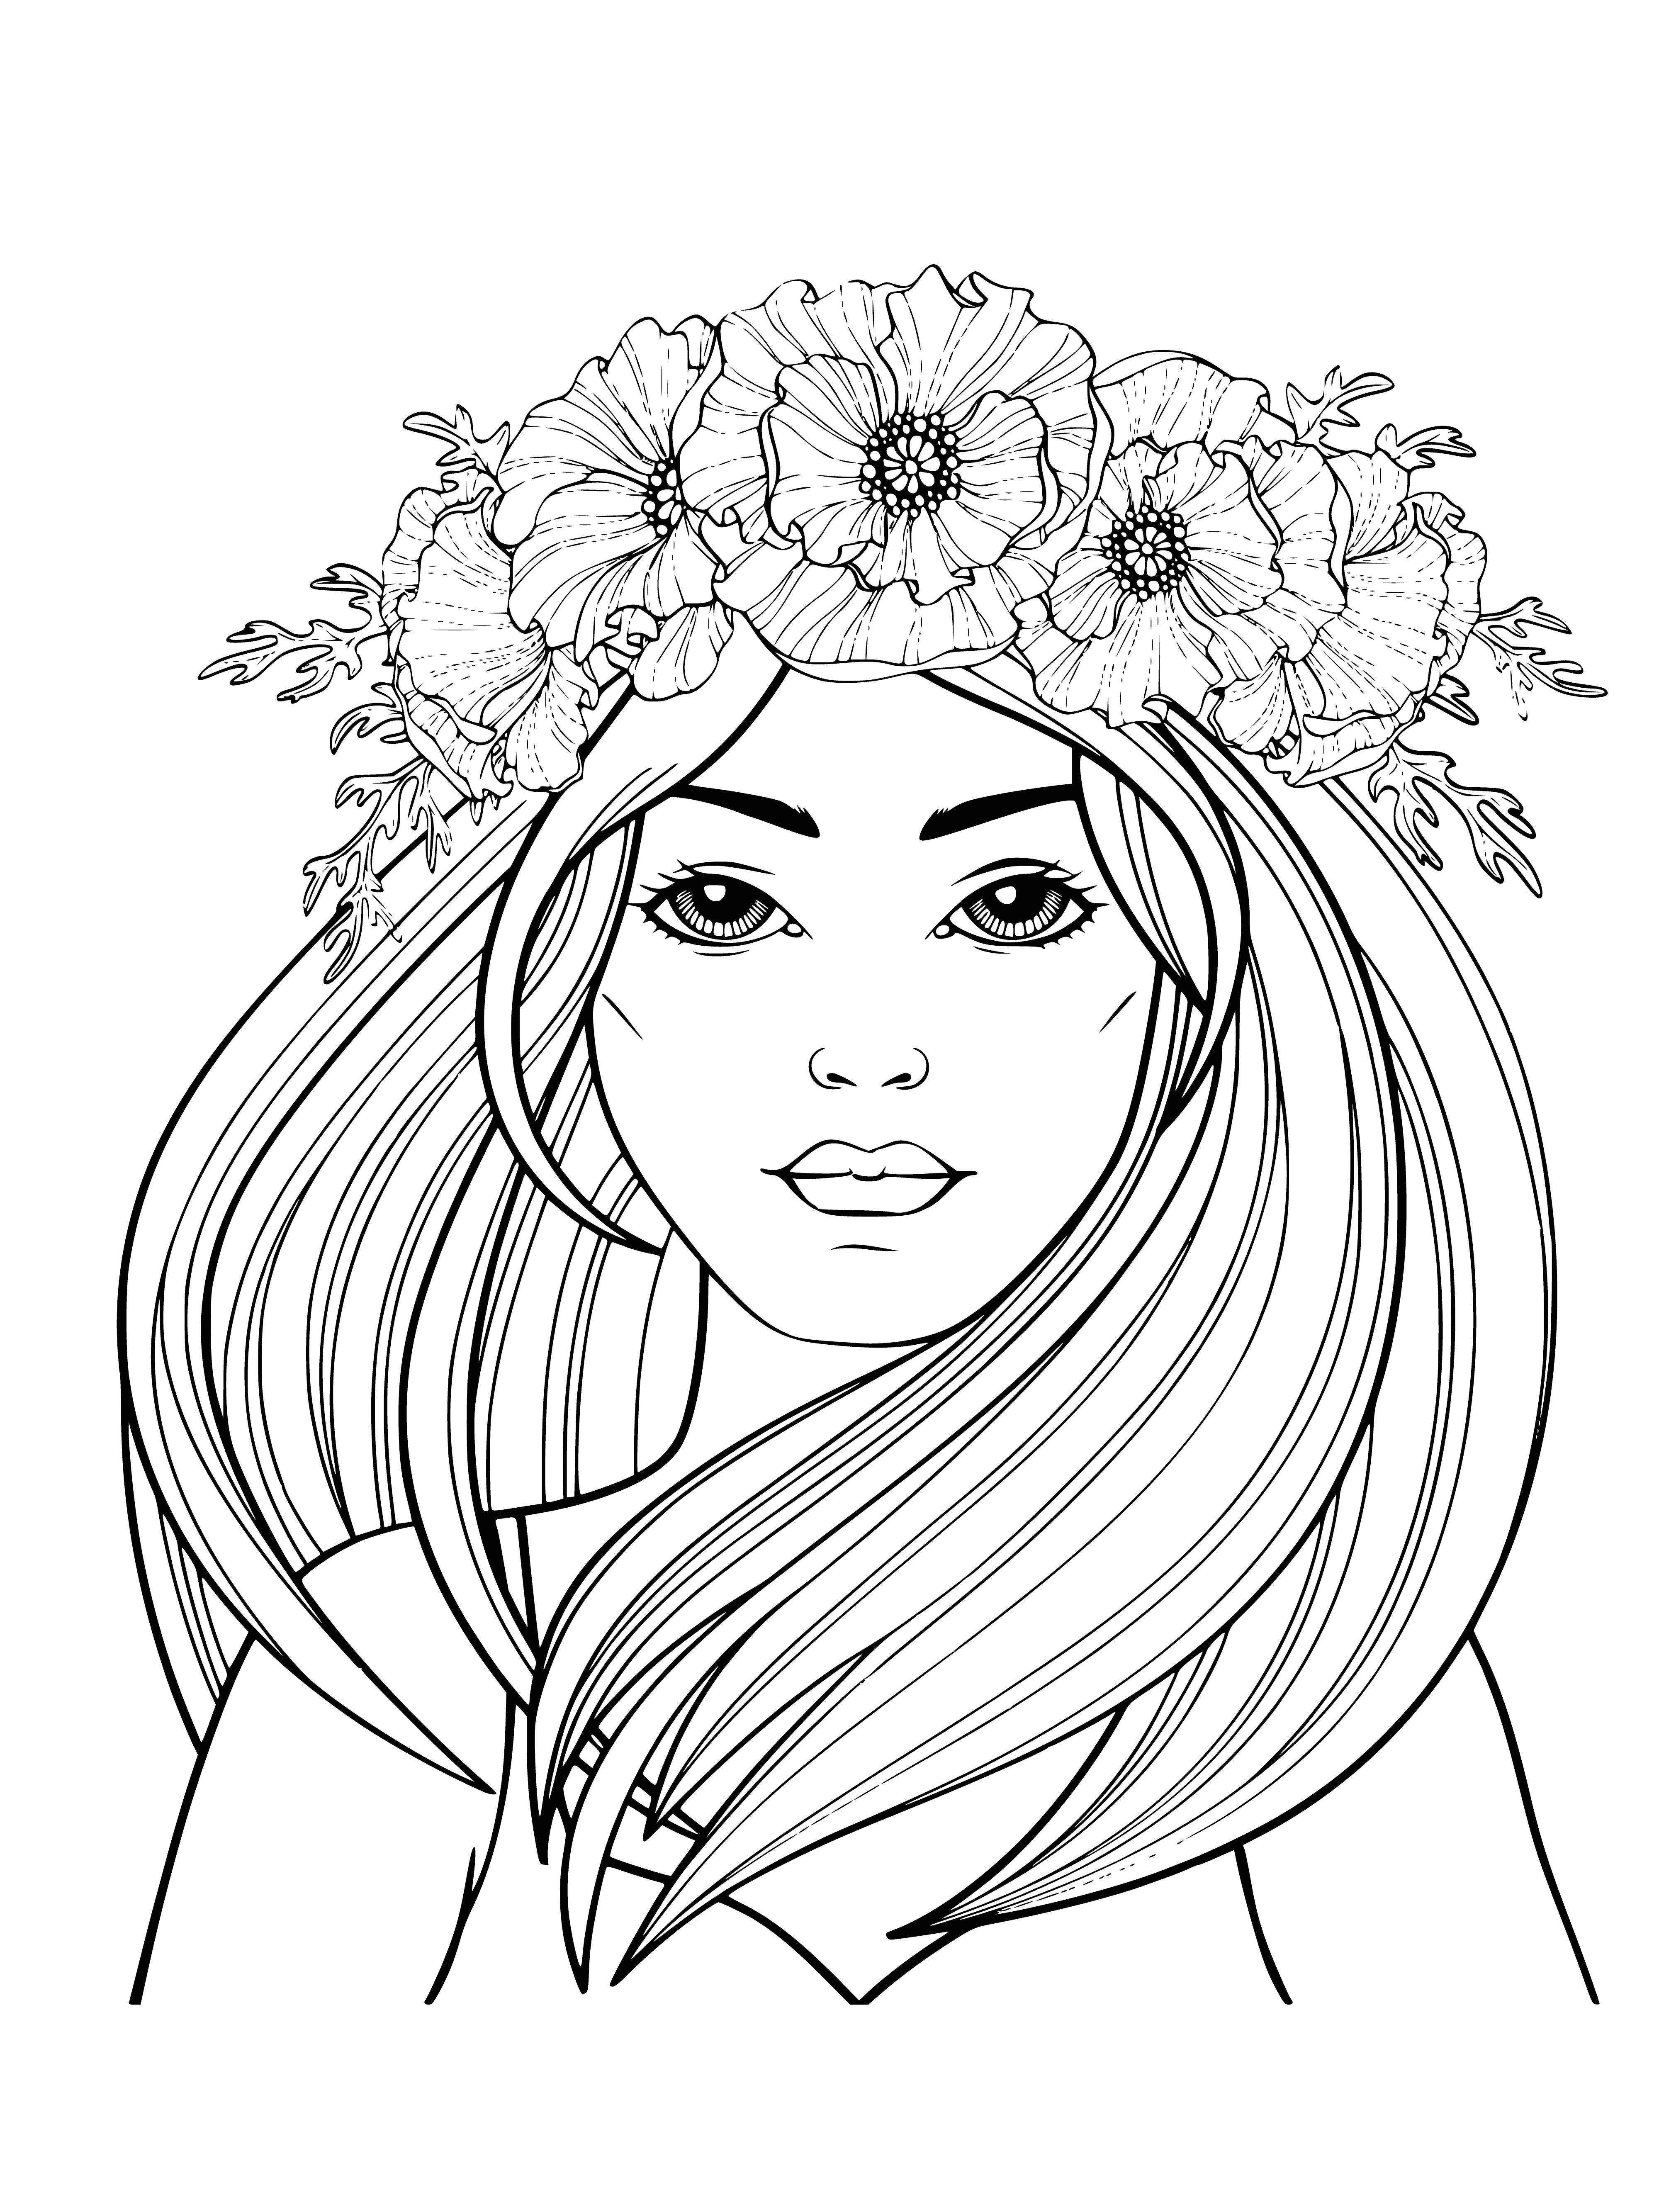 Girl in a wreath coloring page